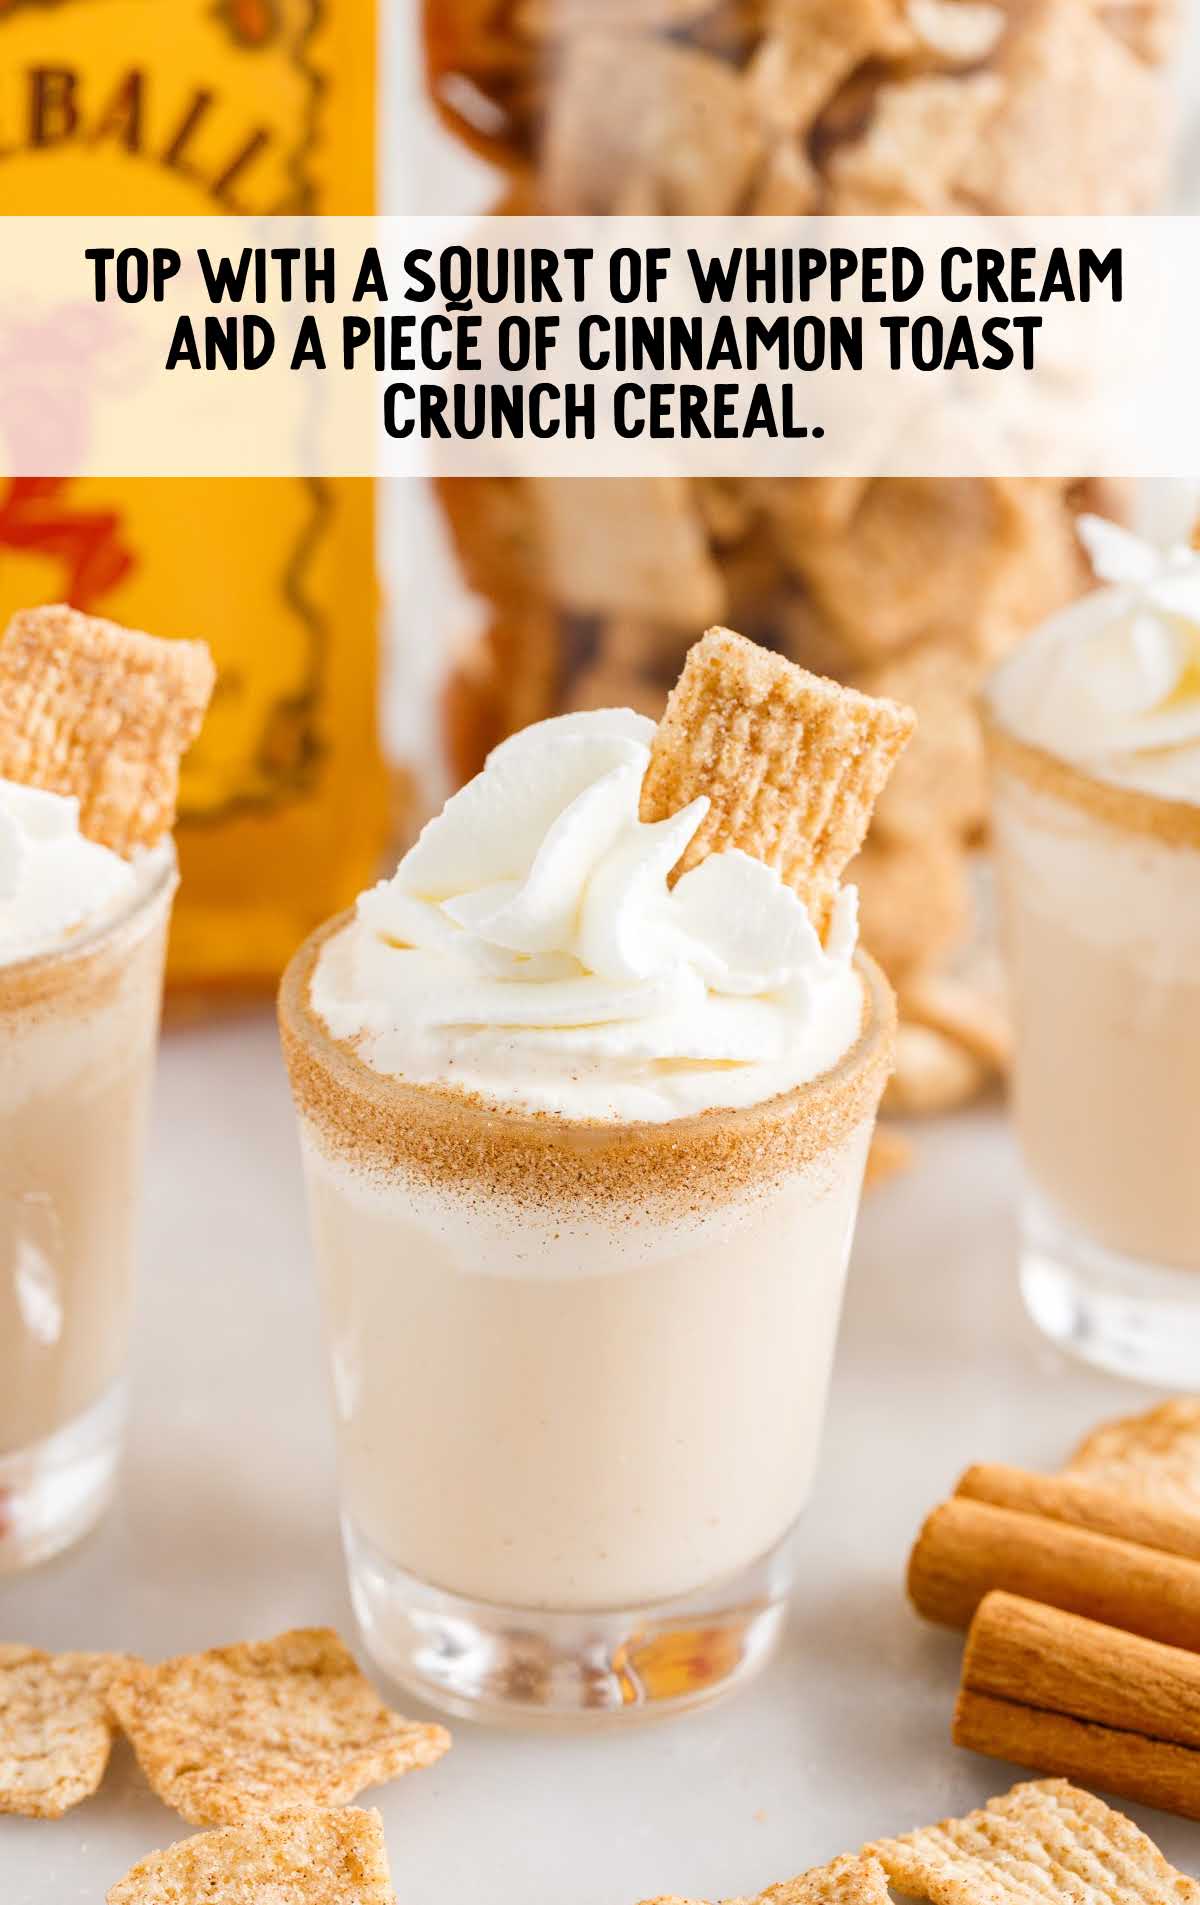 whipped cream and a piece of cinnamon toast crunch garnished on top of the shot